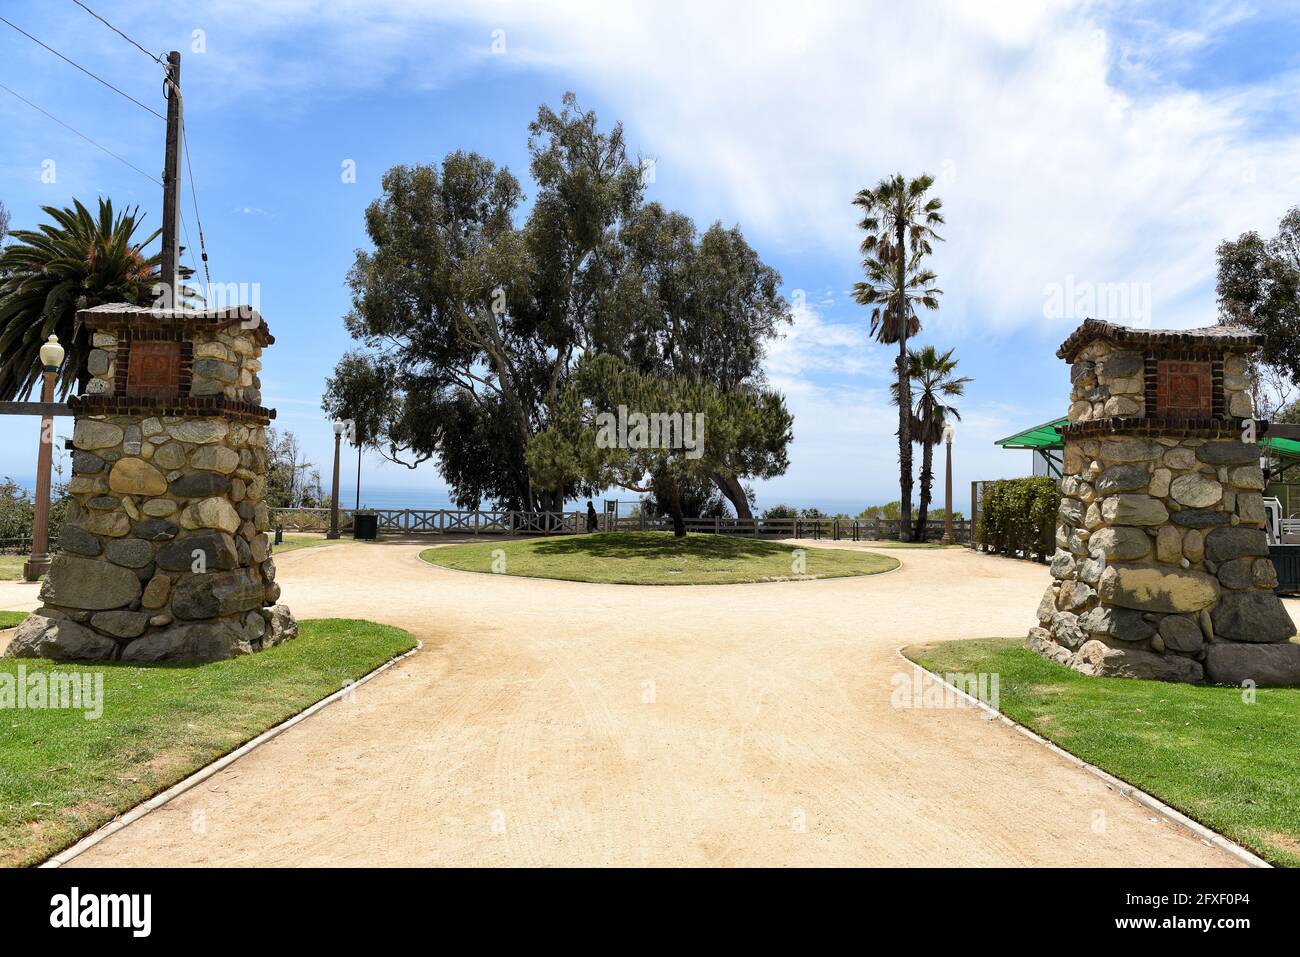 SANTA MONICA, CALIFORNIA - 25 MAY 2021: Idaho Gate, the oldest structure built in Palisades Park, a Craftsman-style archway built in 1912 and named fo Stock Photo